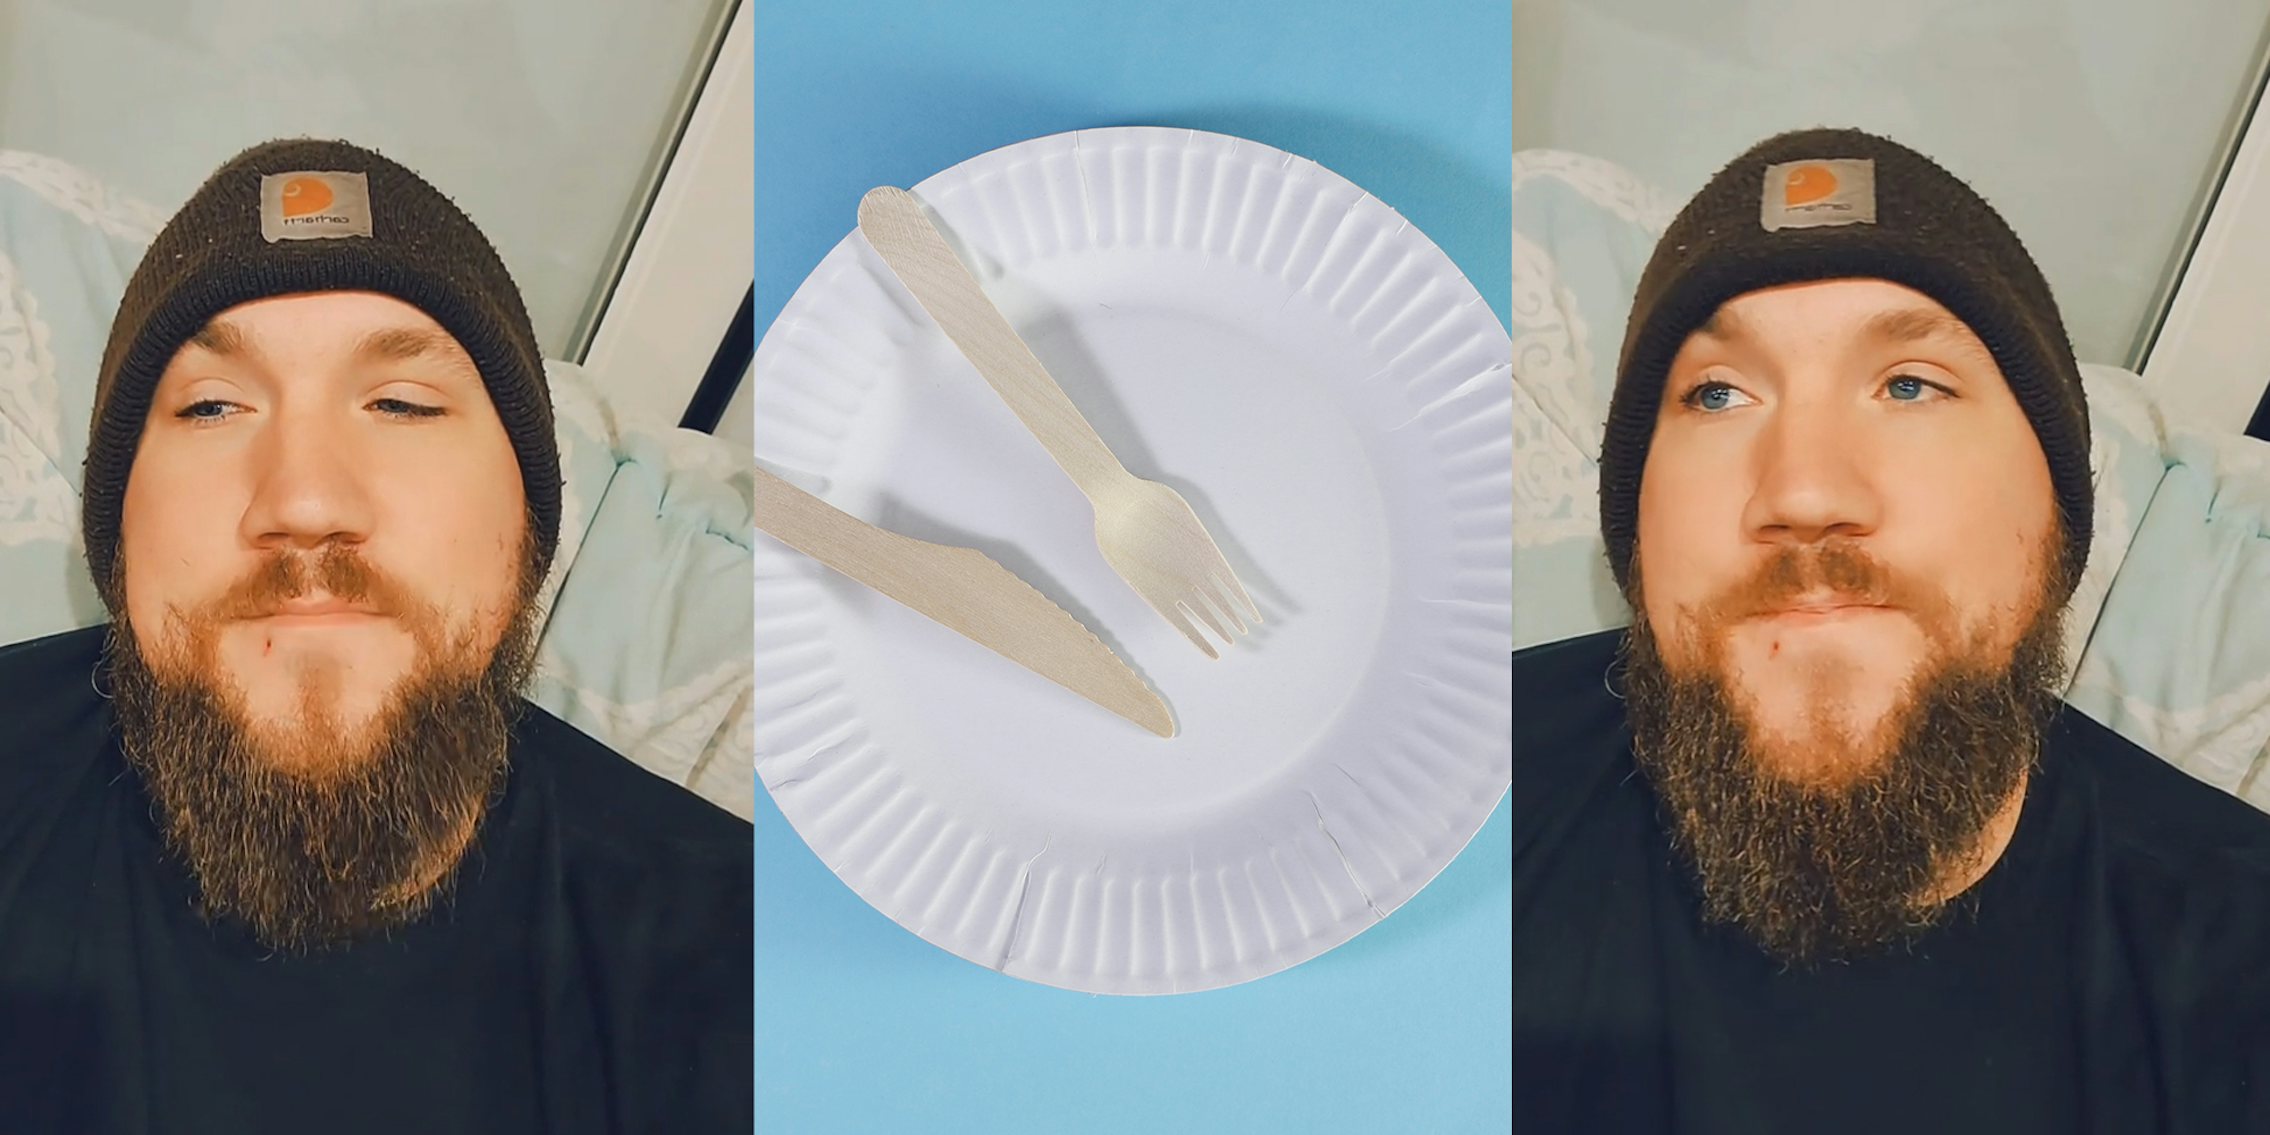 Man explains that 'There's zero quality control' when it comes to the production of paper plates